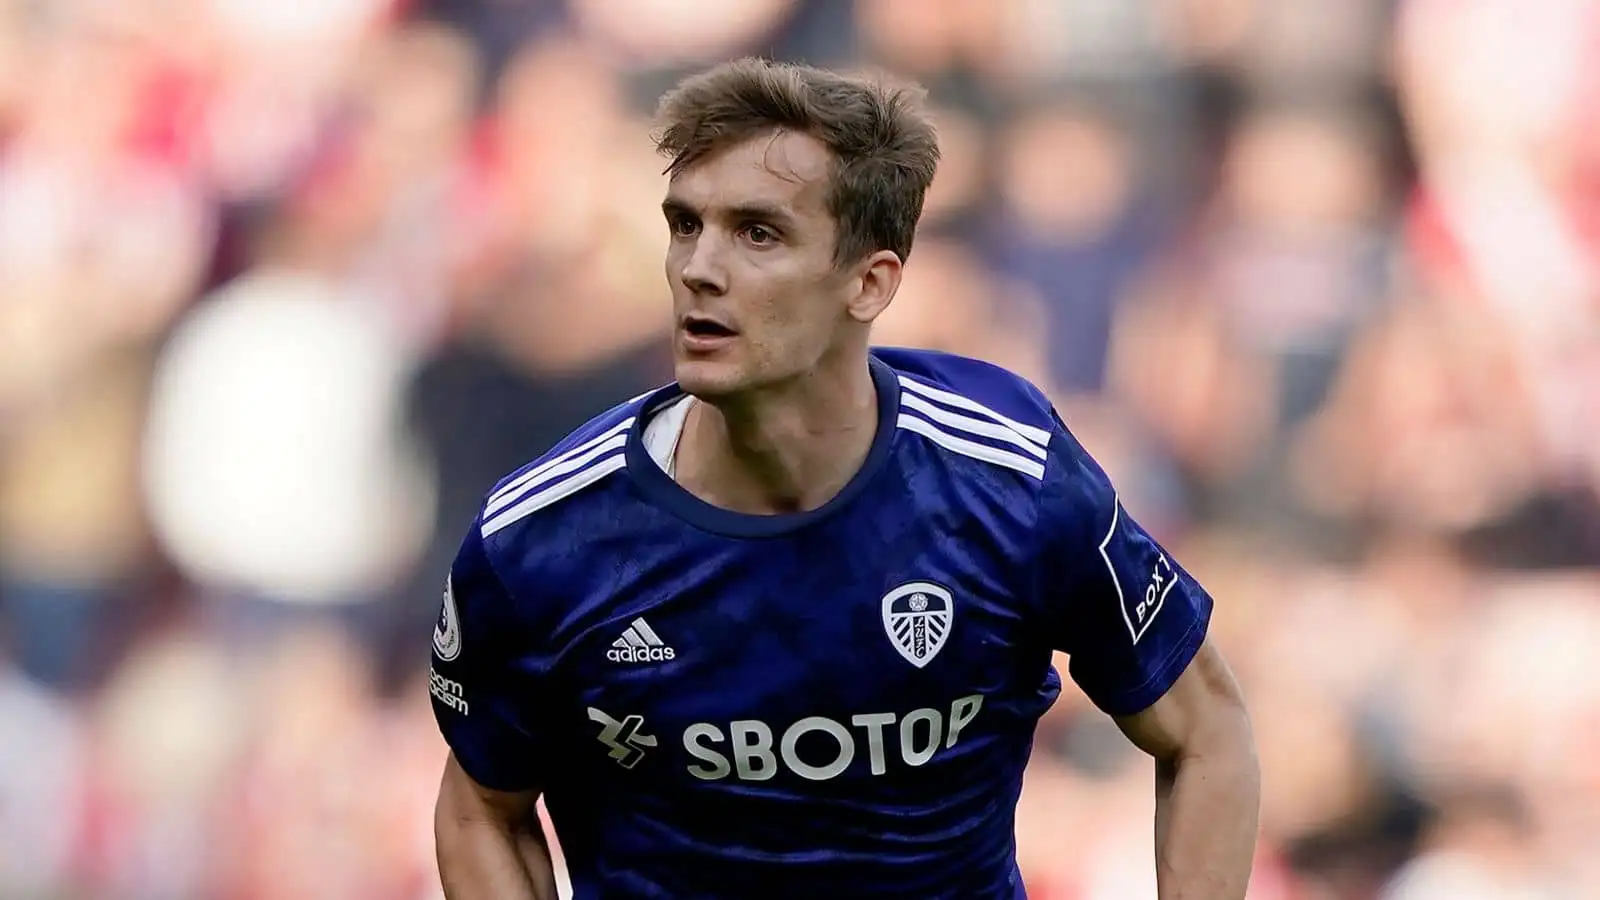 Leeds United's Diego Llorente in action during an English Premier League soccer match against Southampton at St. Mary's Stadium in Southampton